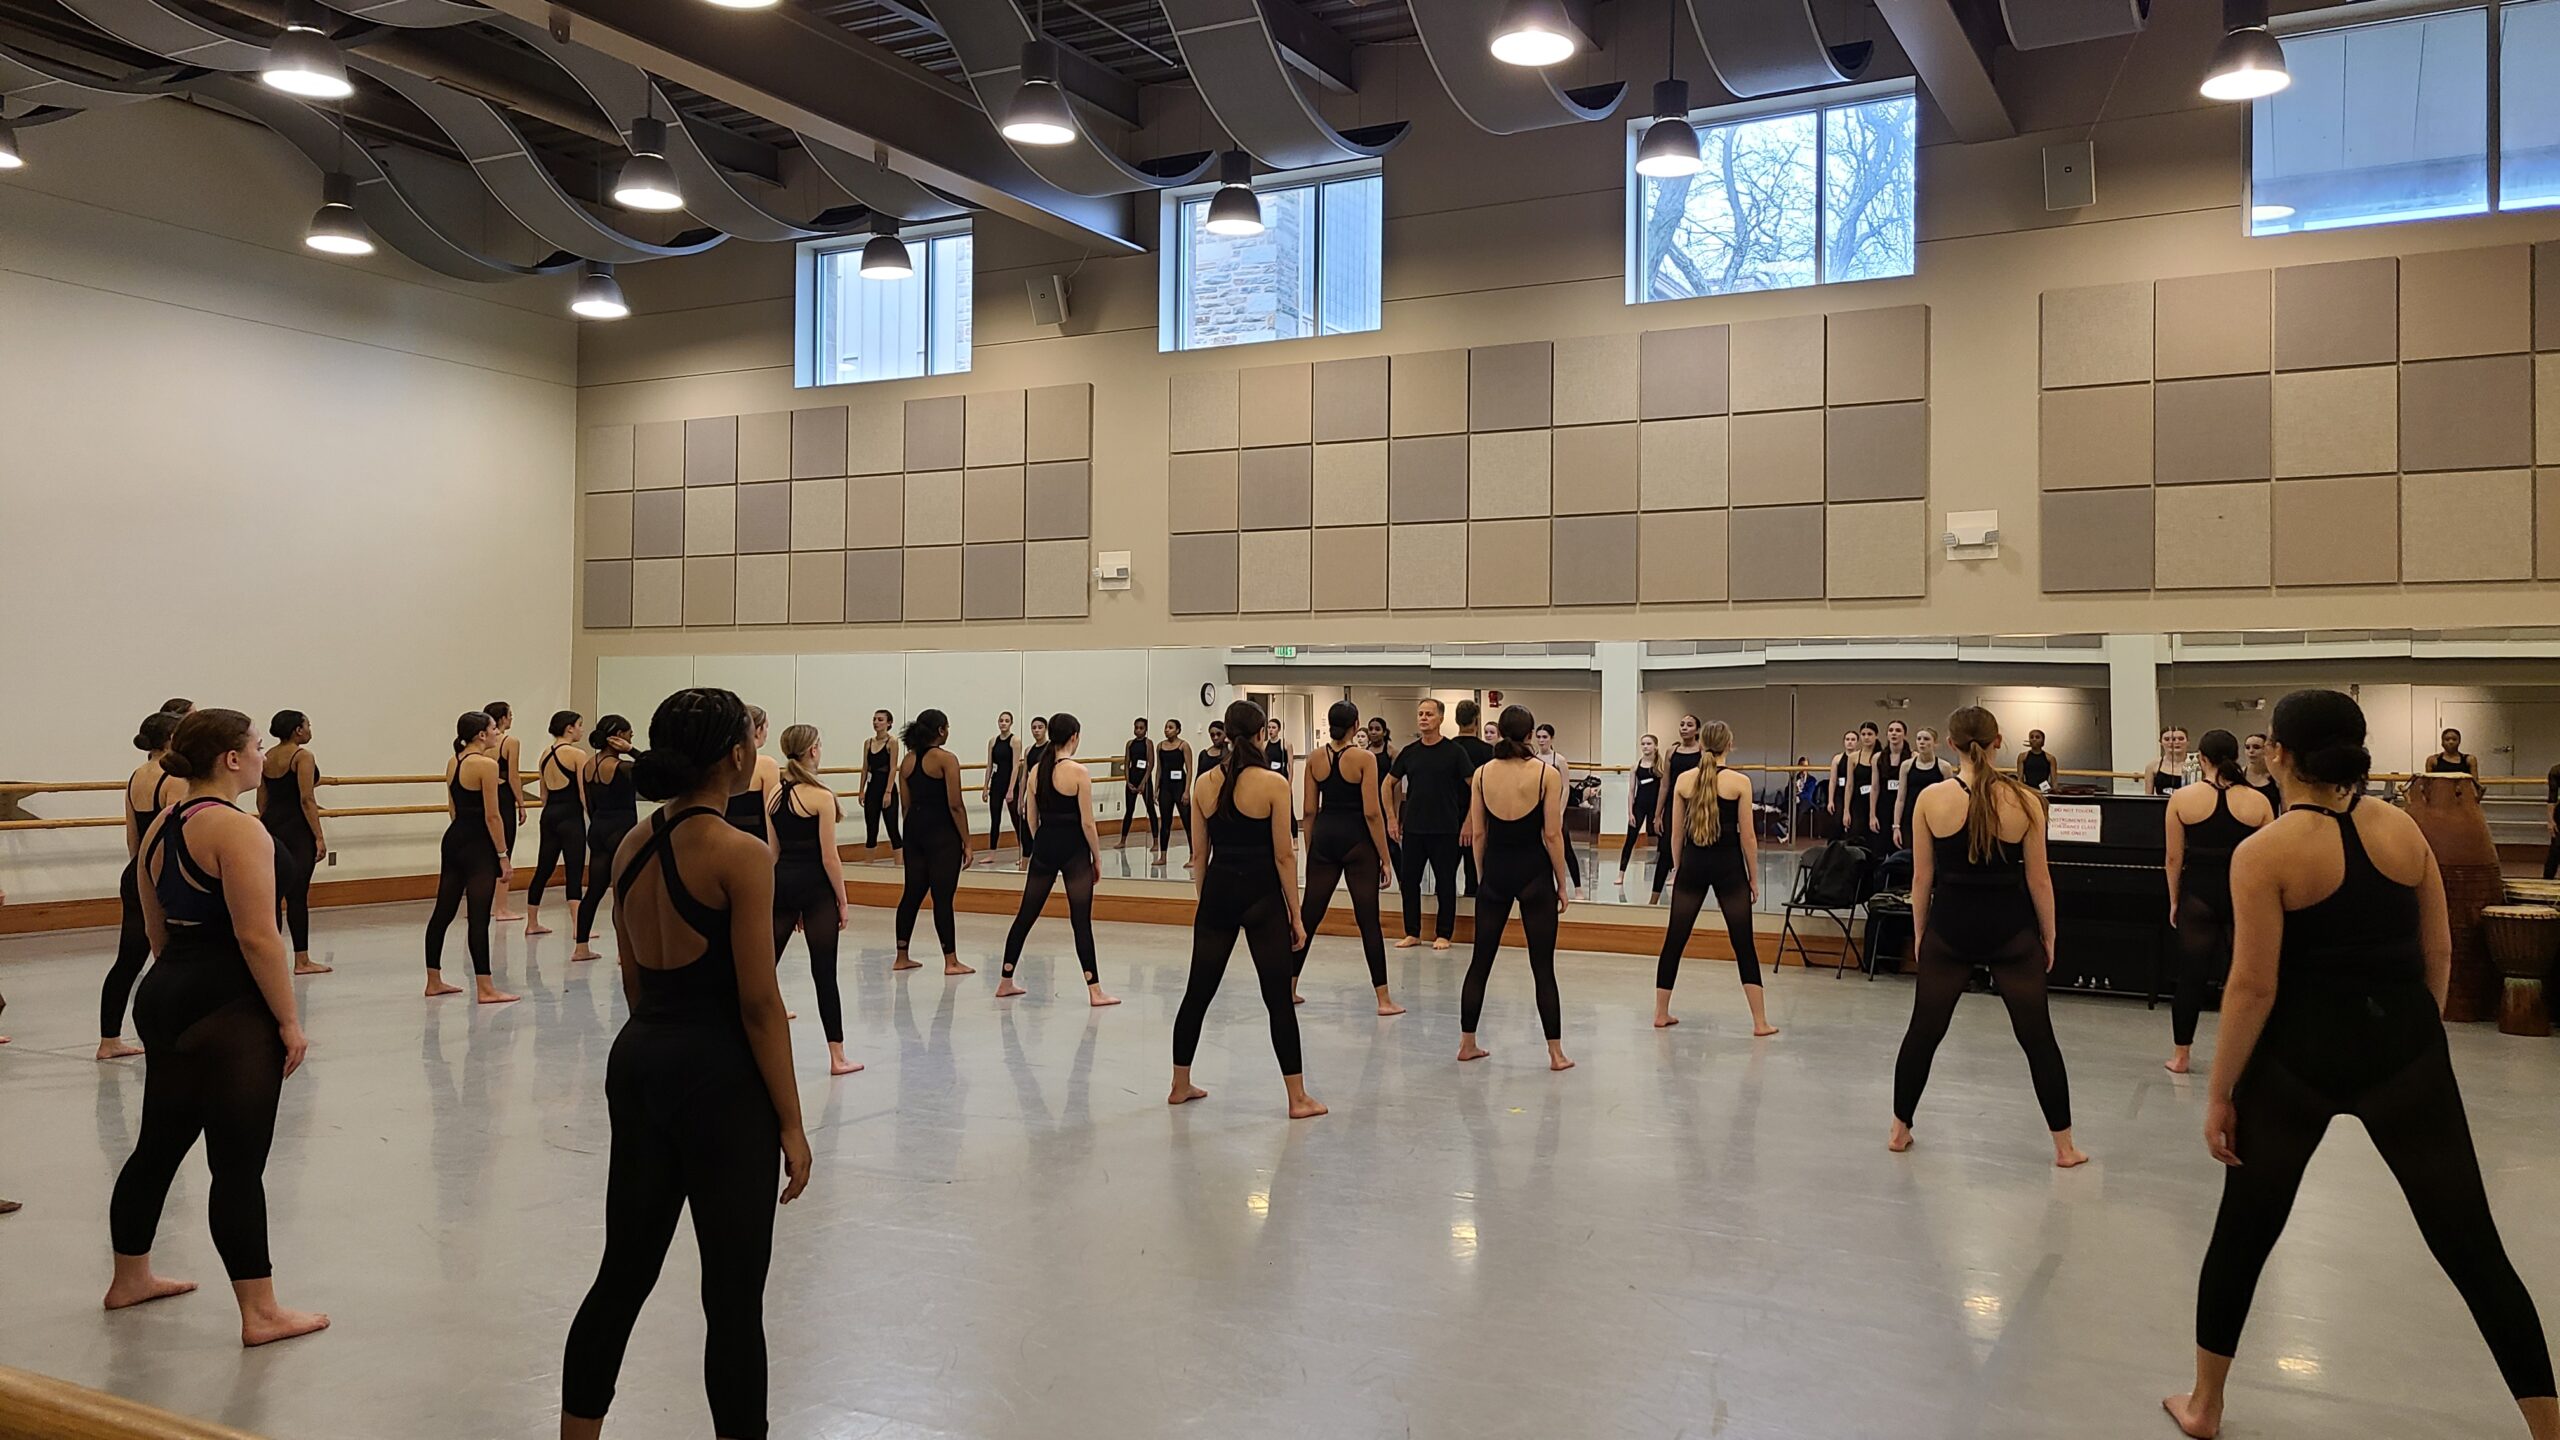 A Week of Dance Classes Across Queen Annes County - Carole Cascio Fund for  Mind Movement Dance Connections